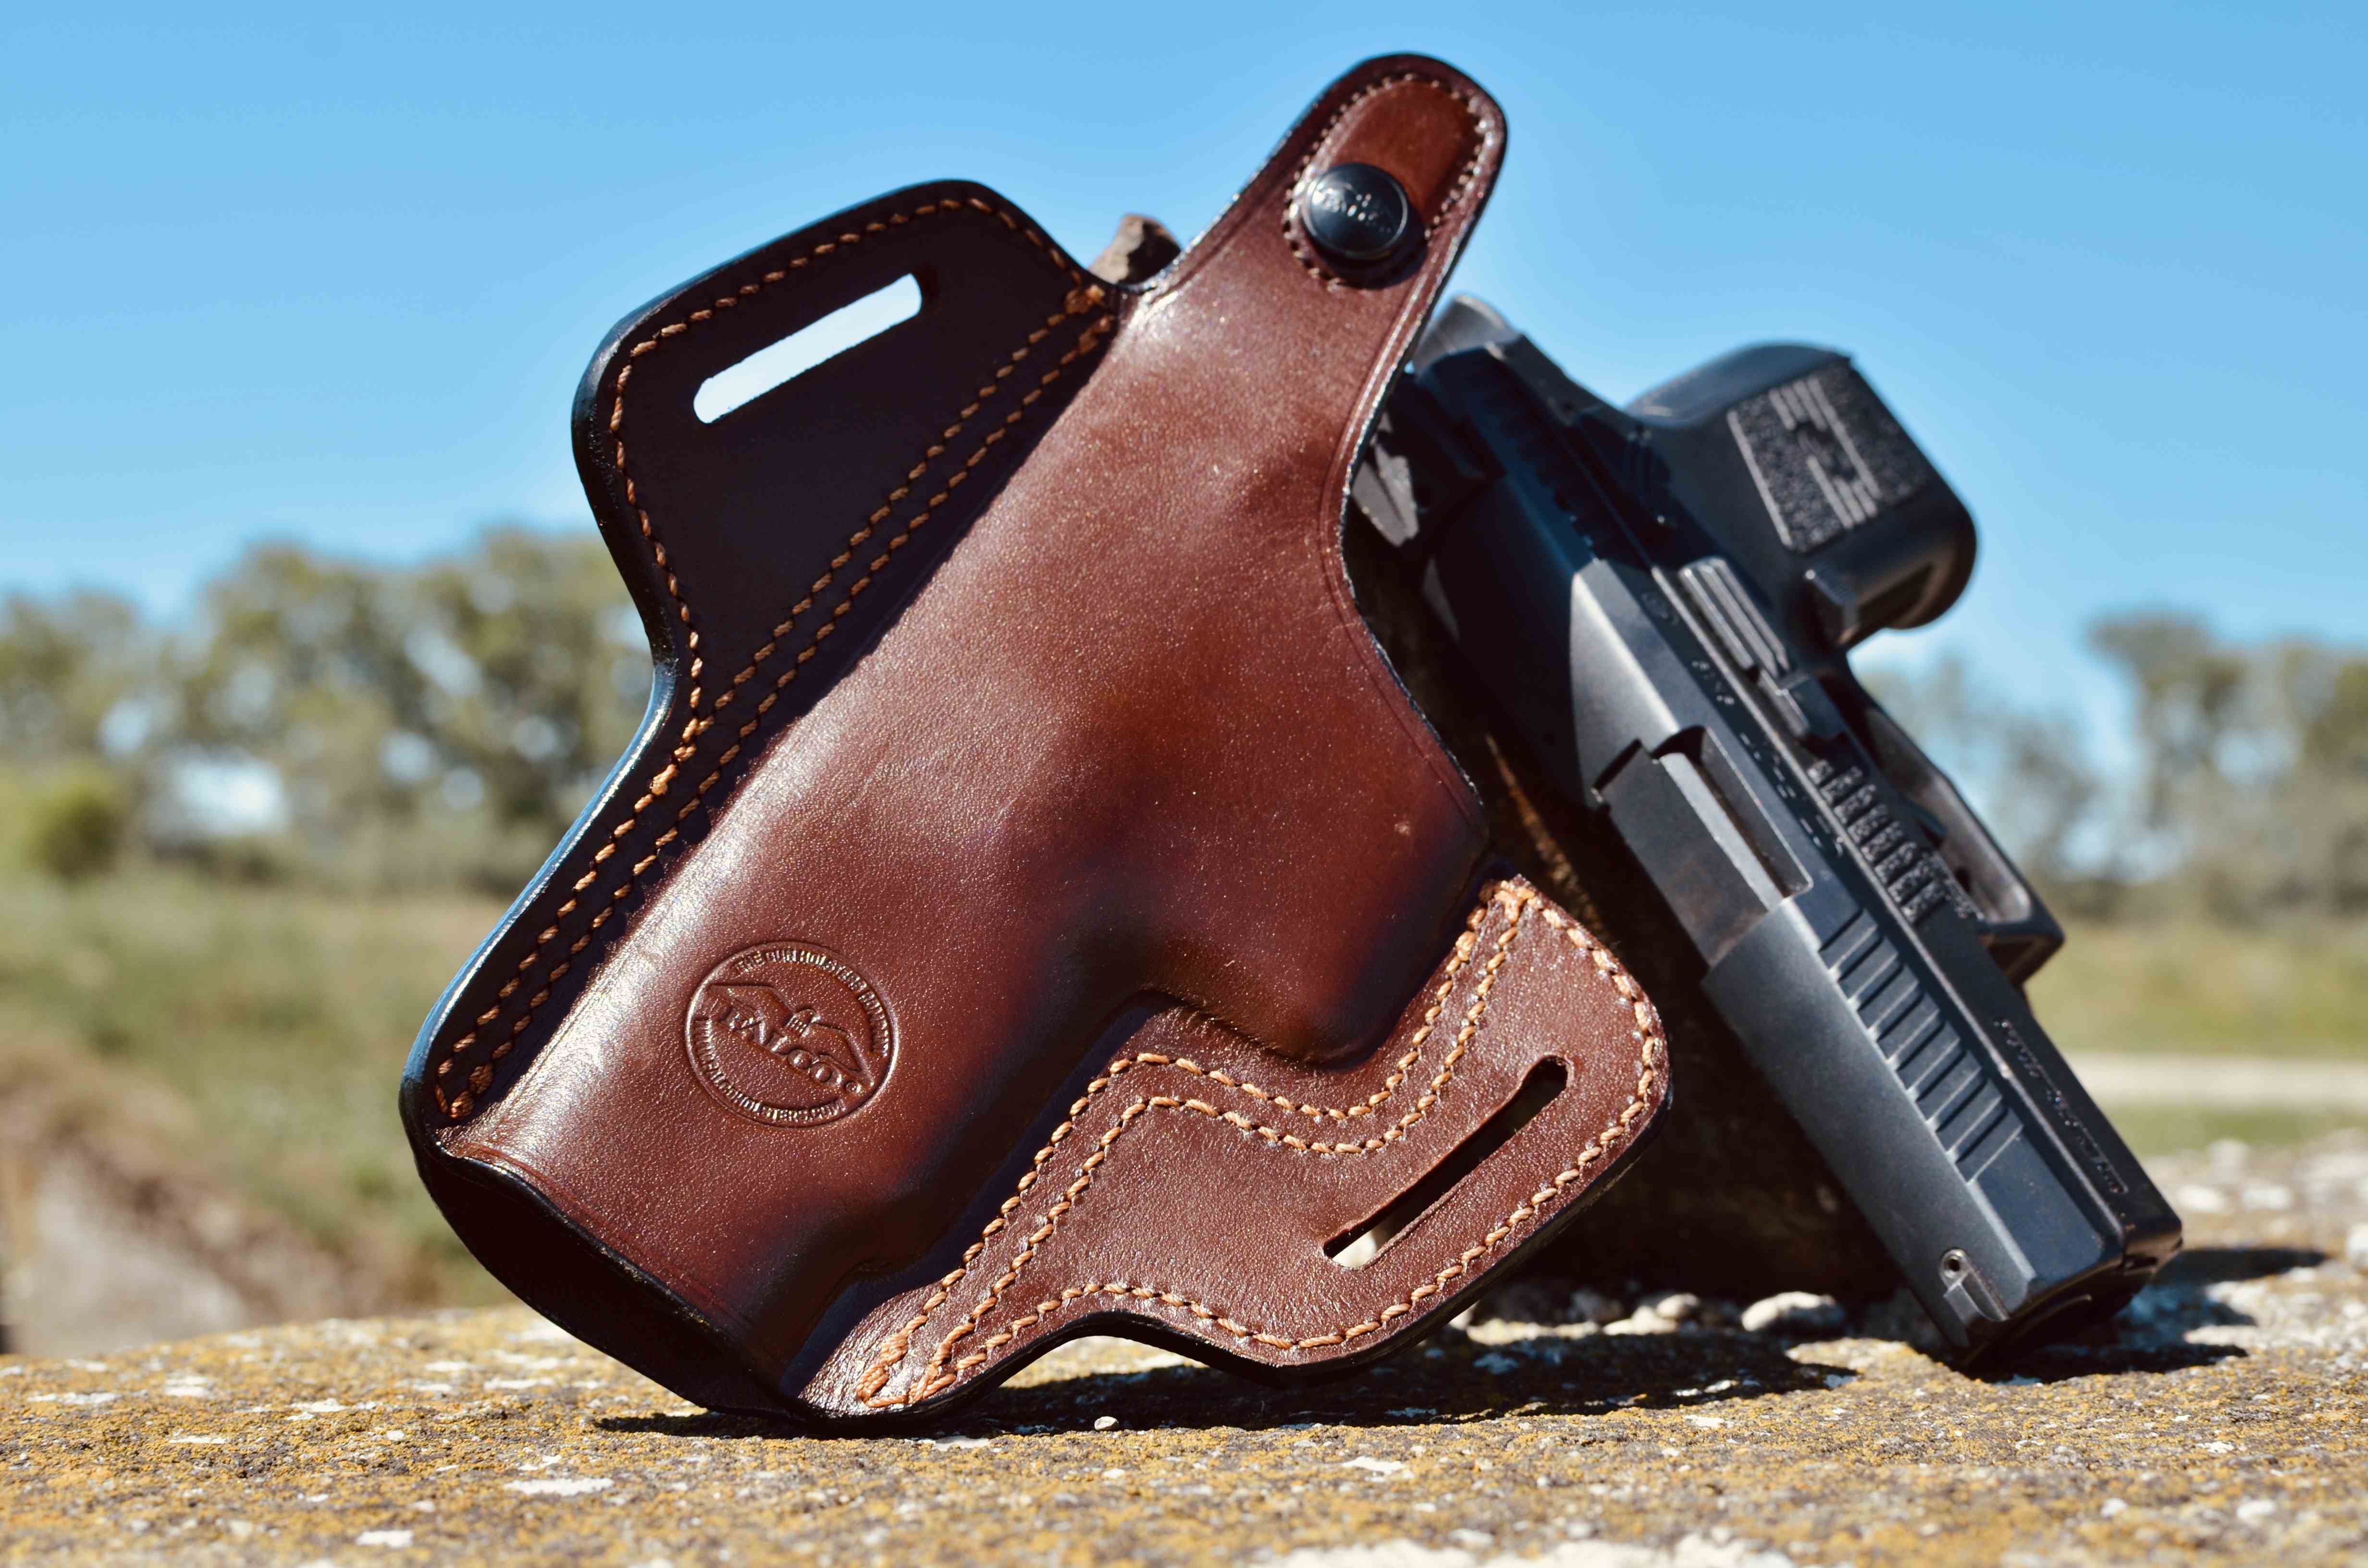 Leather Owb Thumb Break Holster for Browning Hi Power Choose Color. 